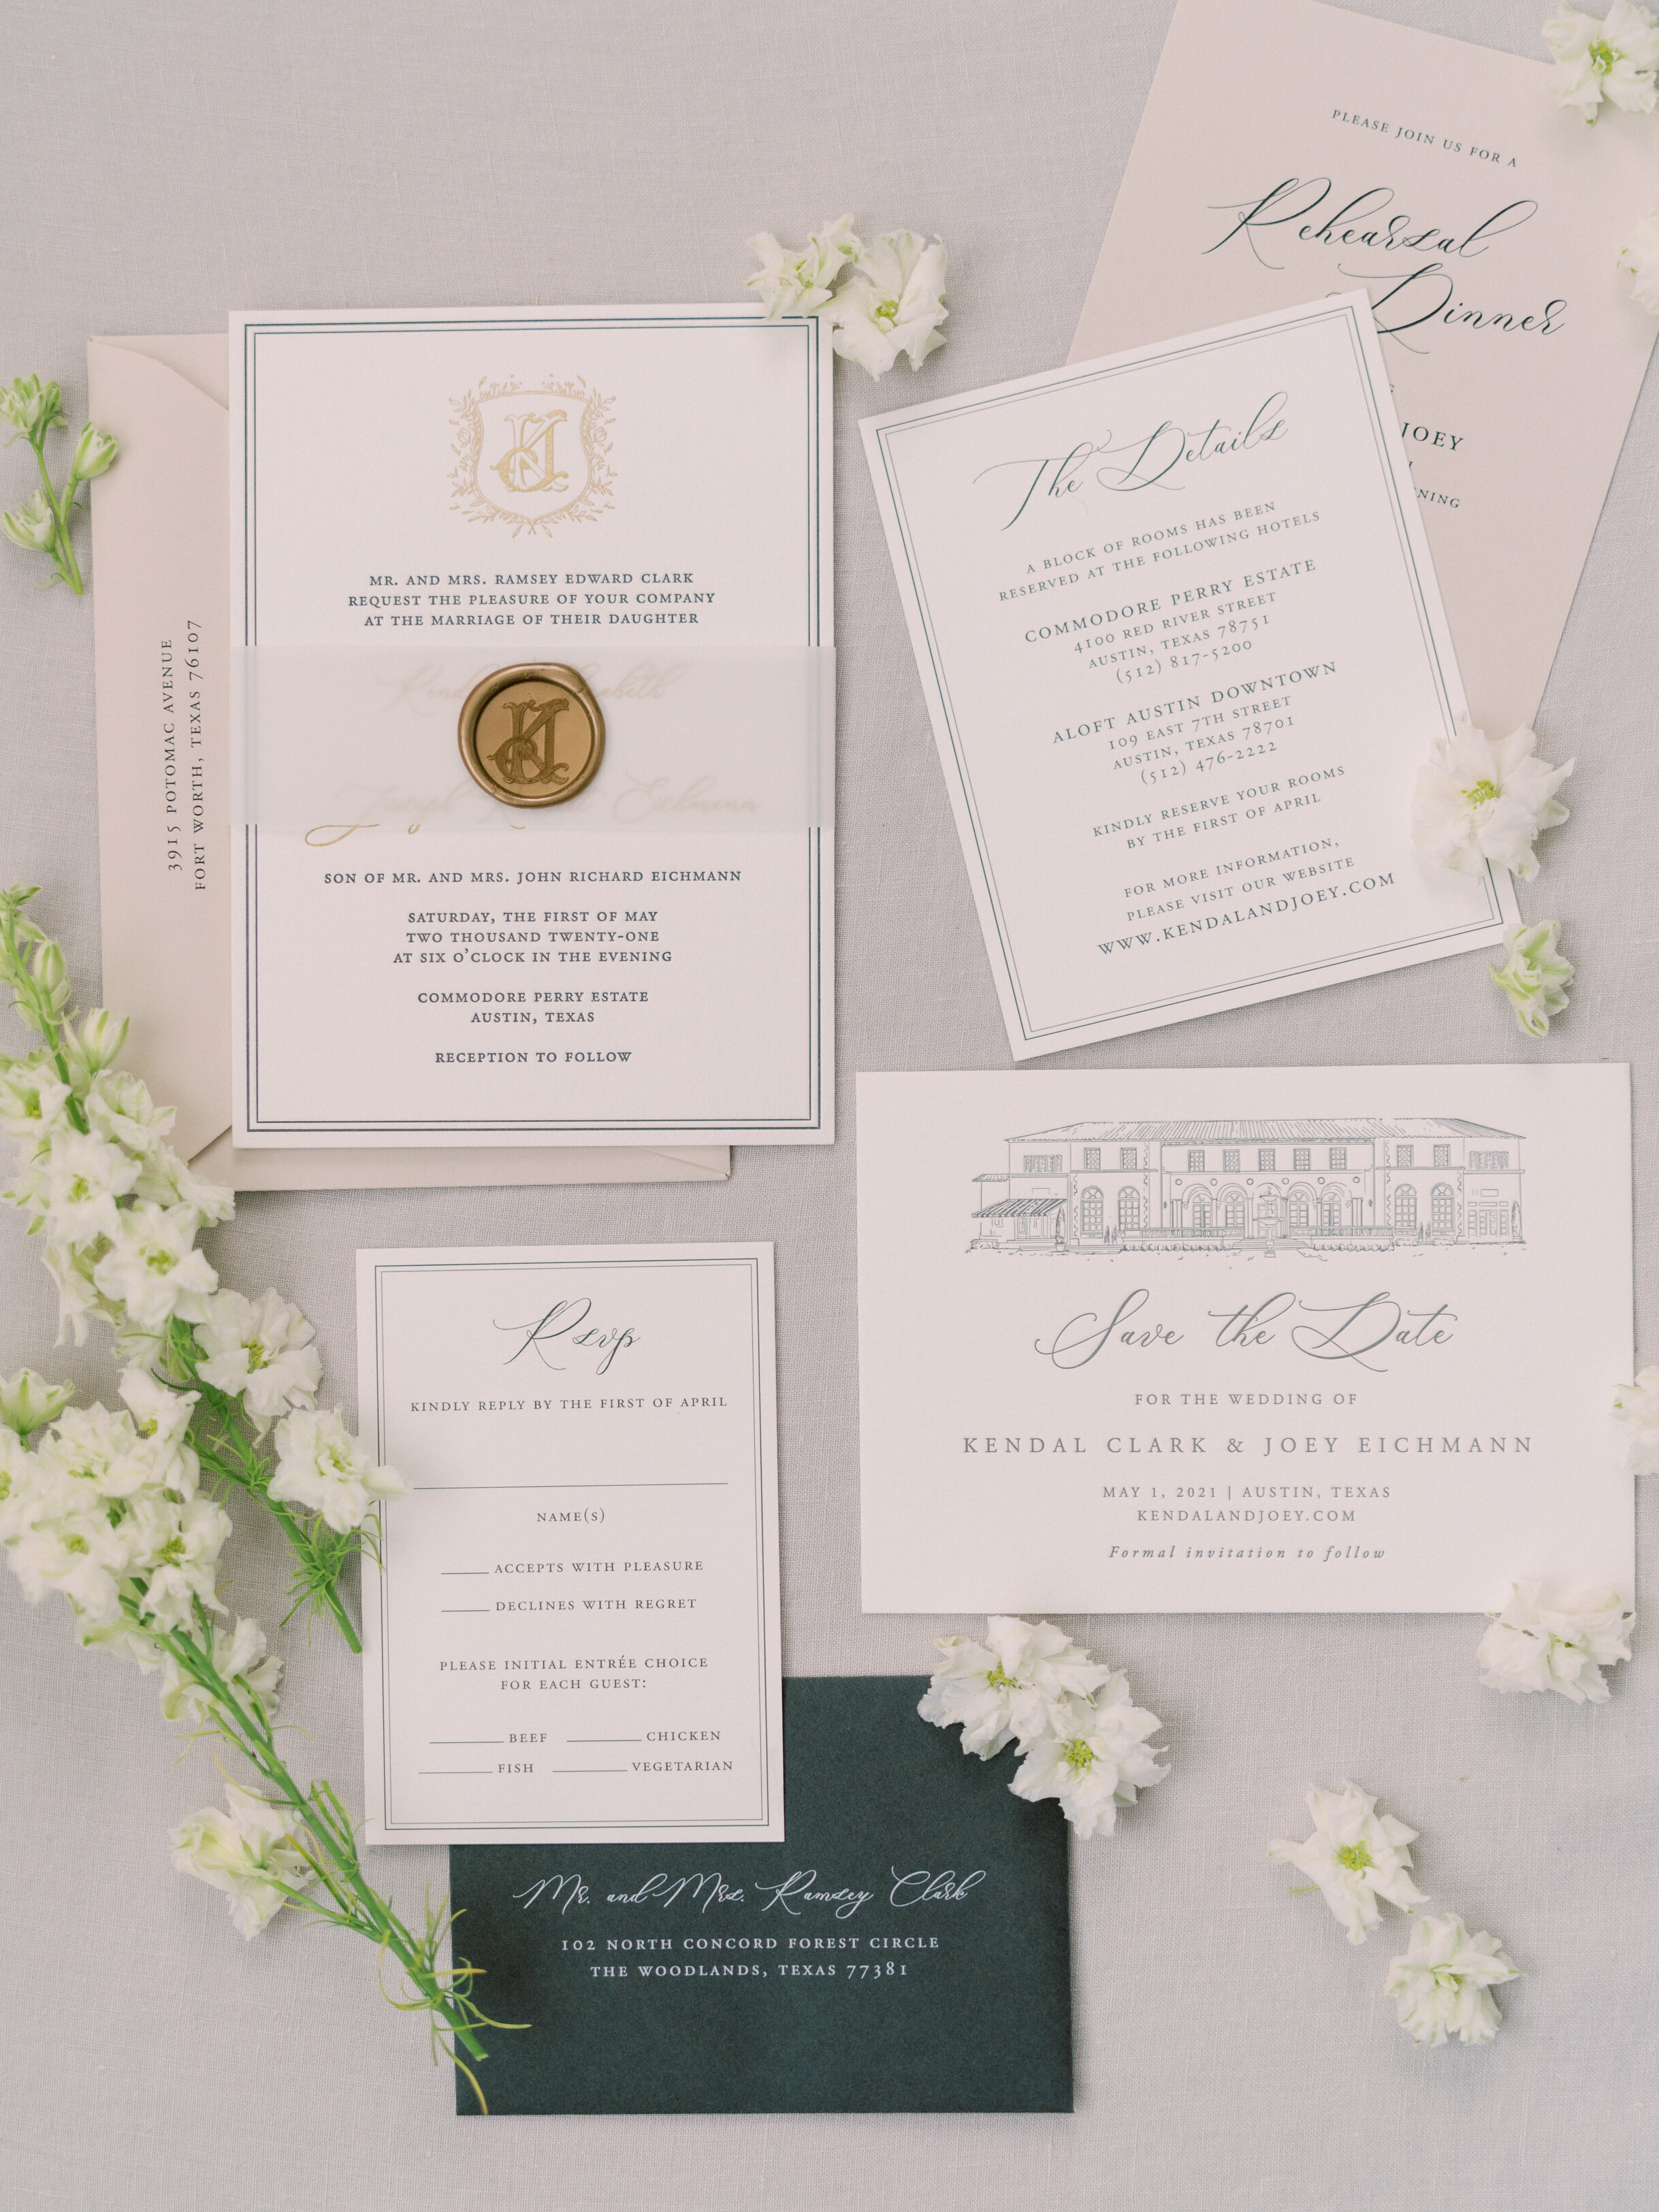 Pink-Champagne-Designs-Classic-Romance-themed-wedding-suite-inspiration